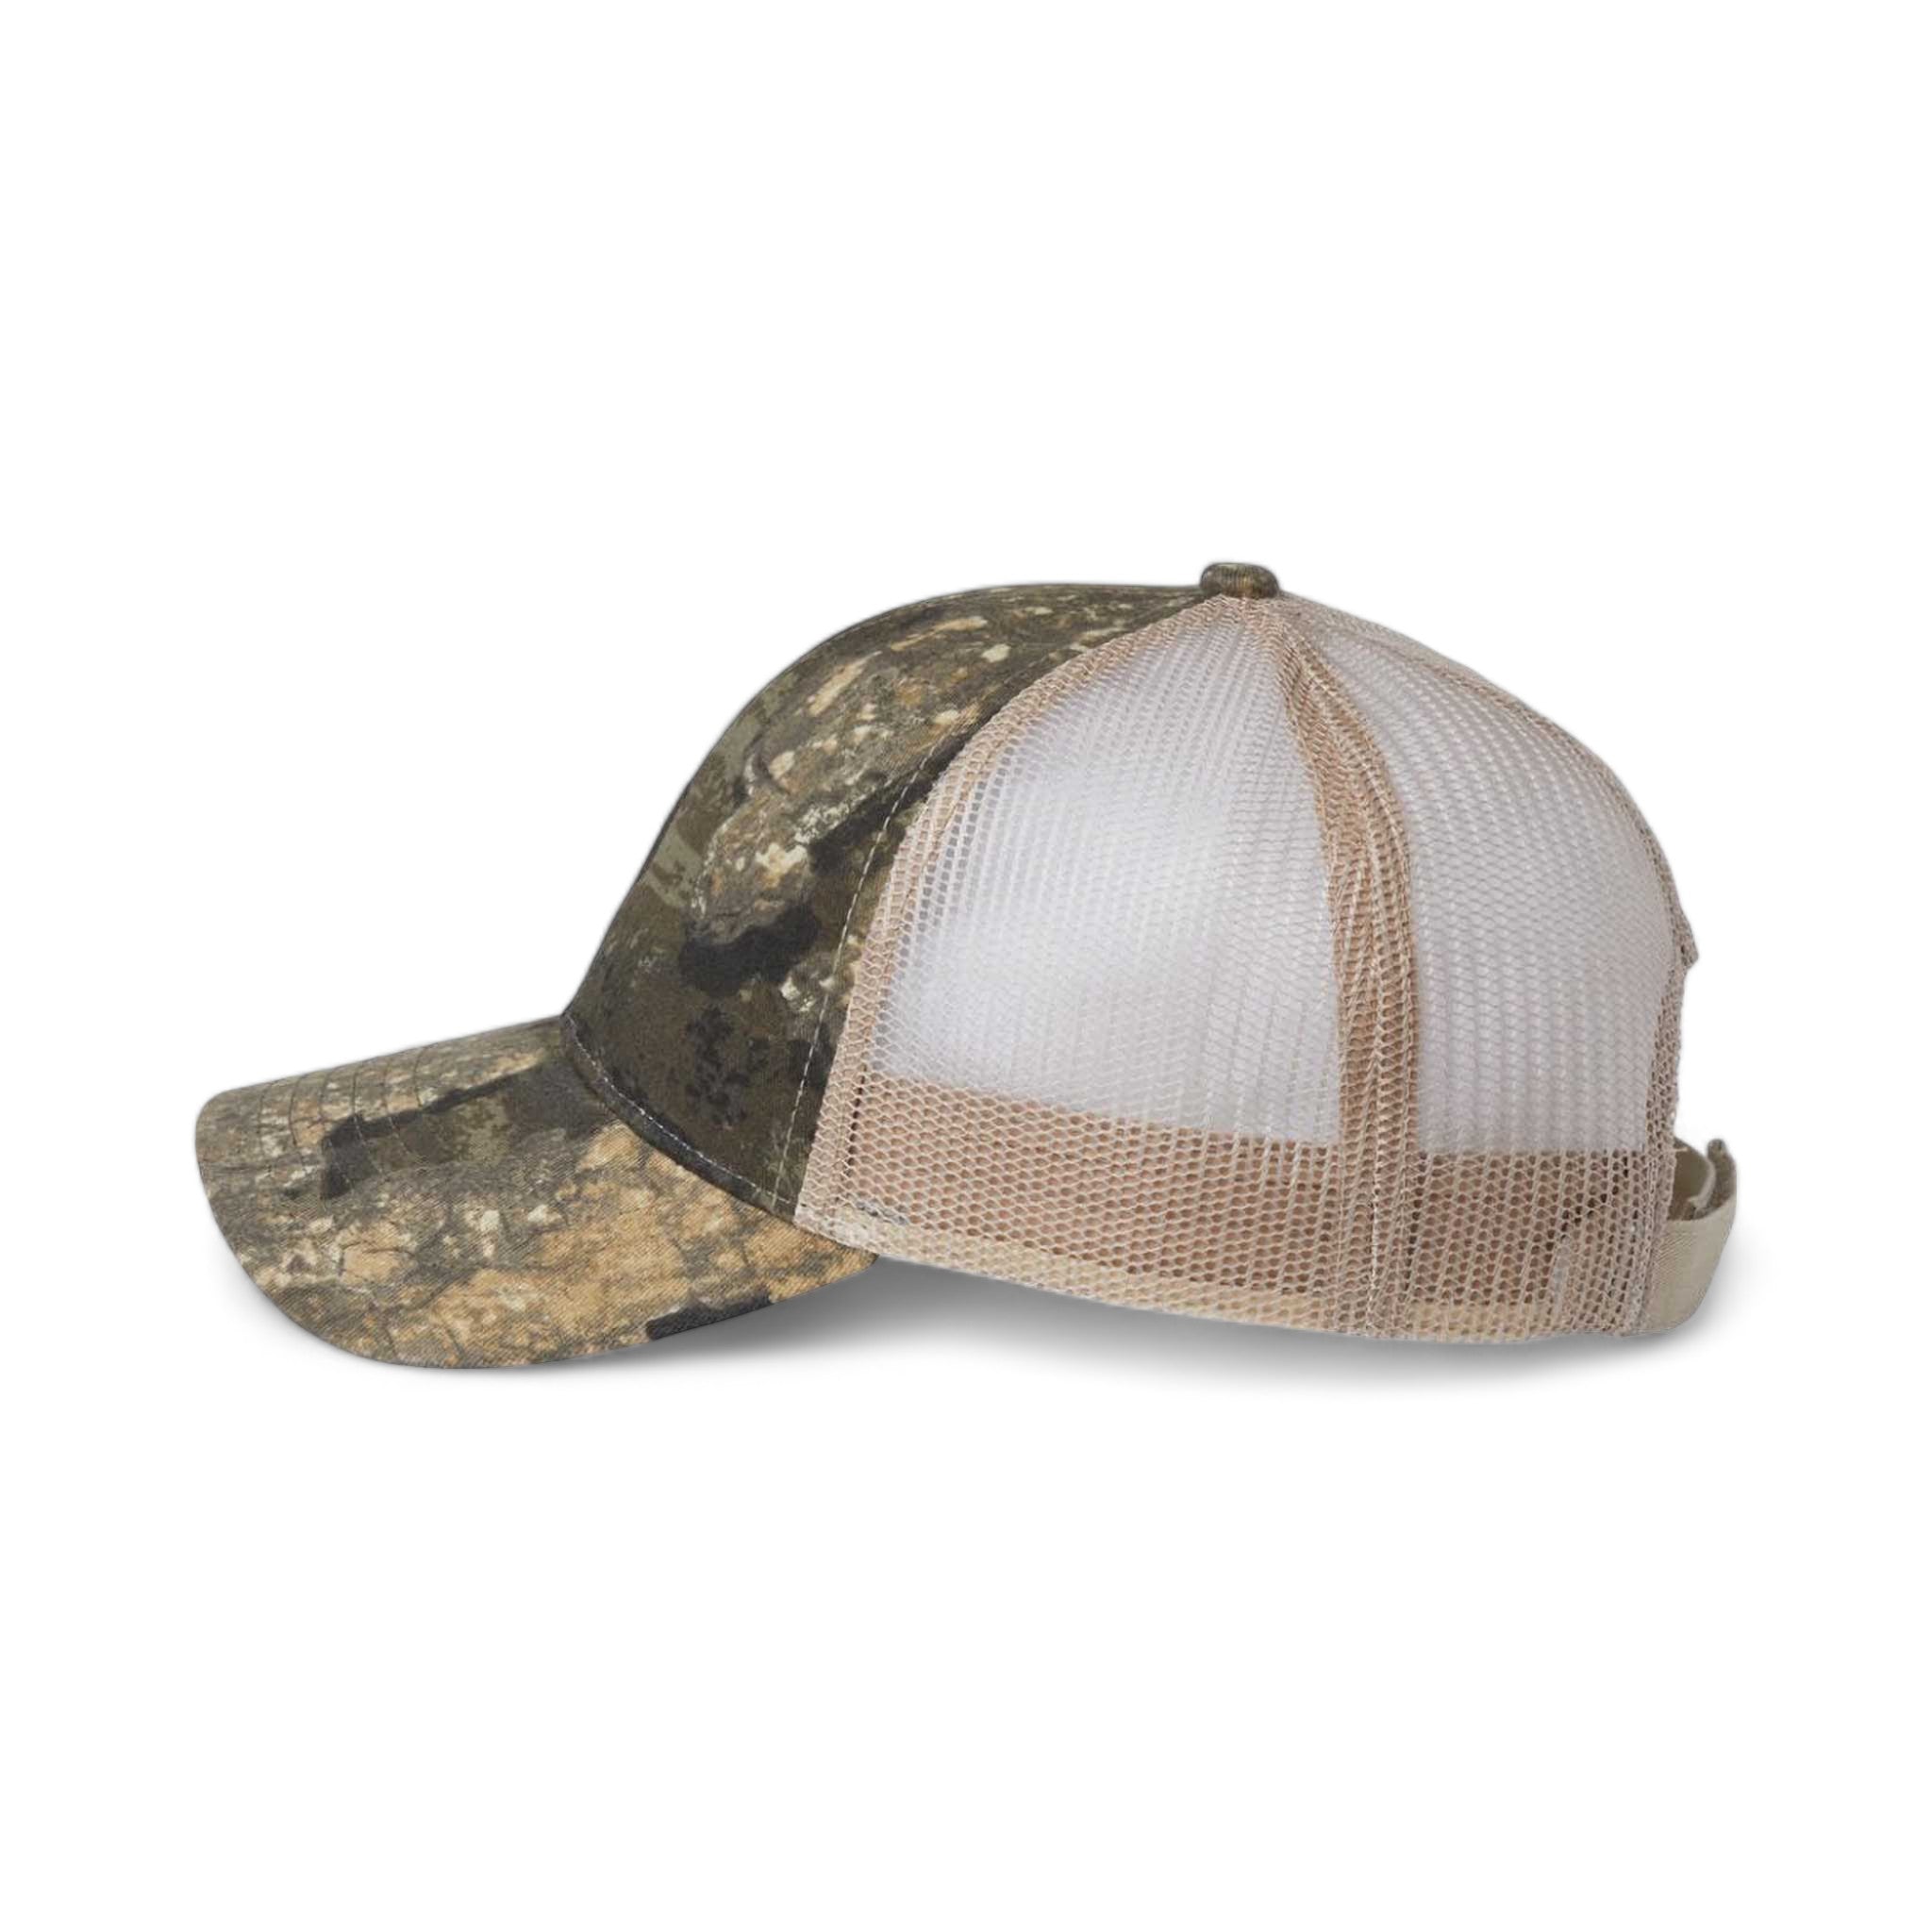 Side view of Kati LC5M custom hat in new timber and tan